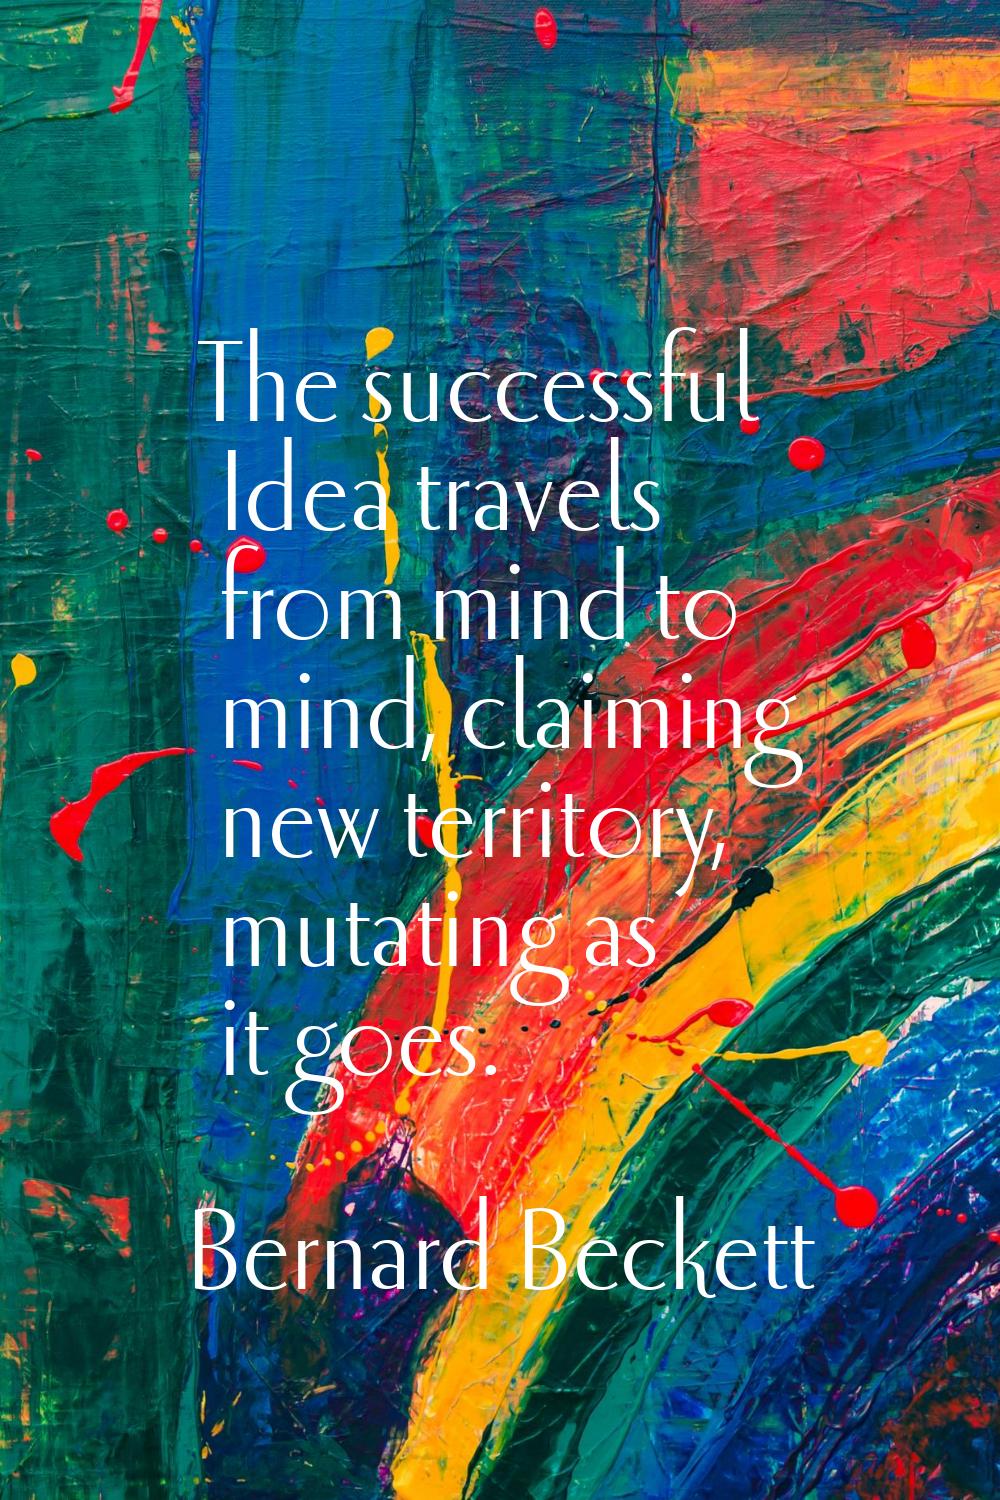 The successful Idea travels from mind to mind, claiming new territory, mutating as it goes.